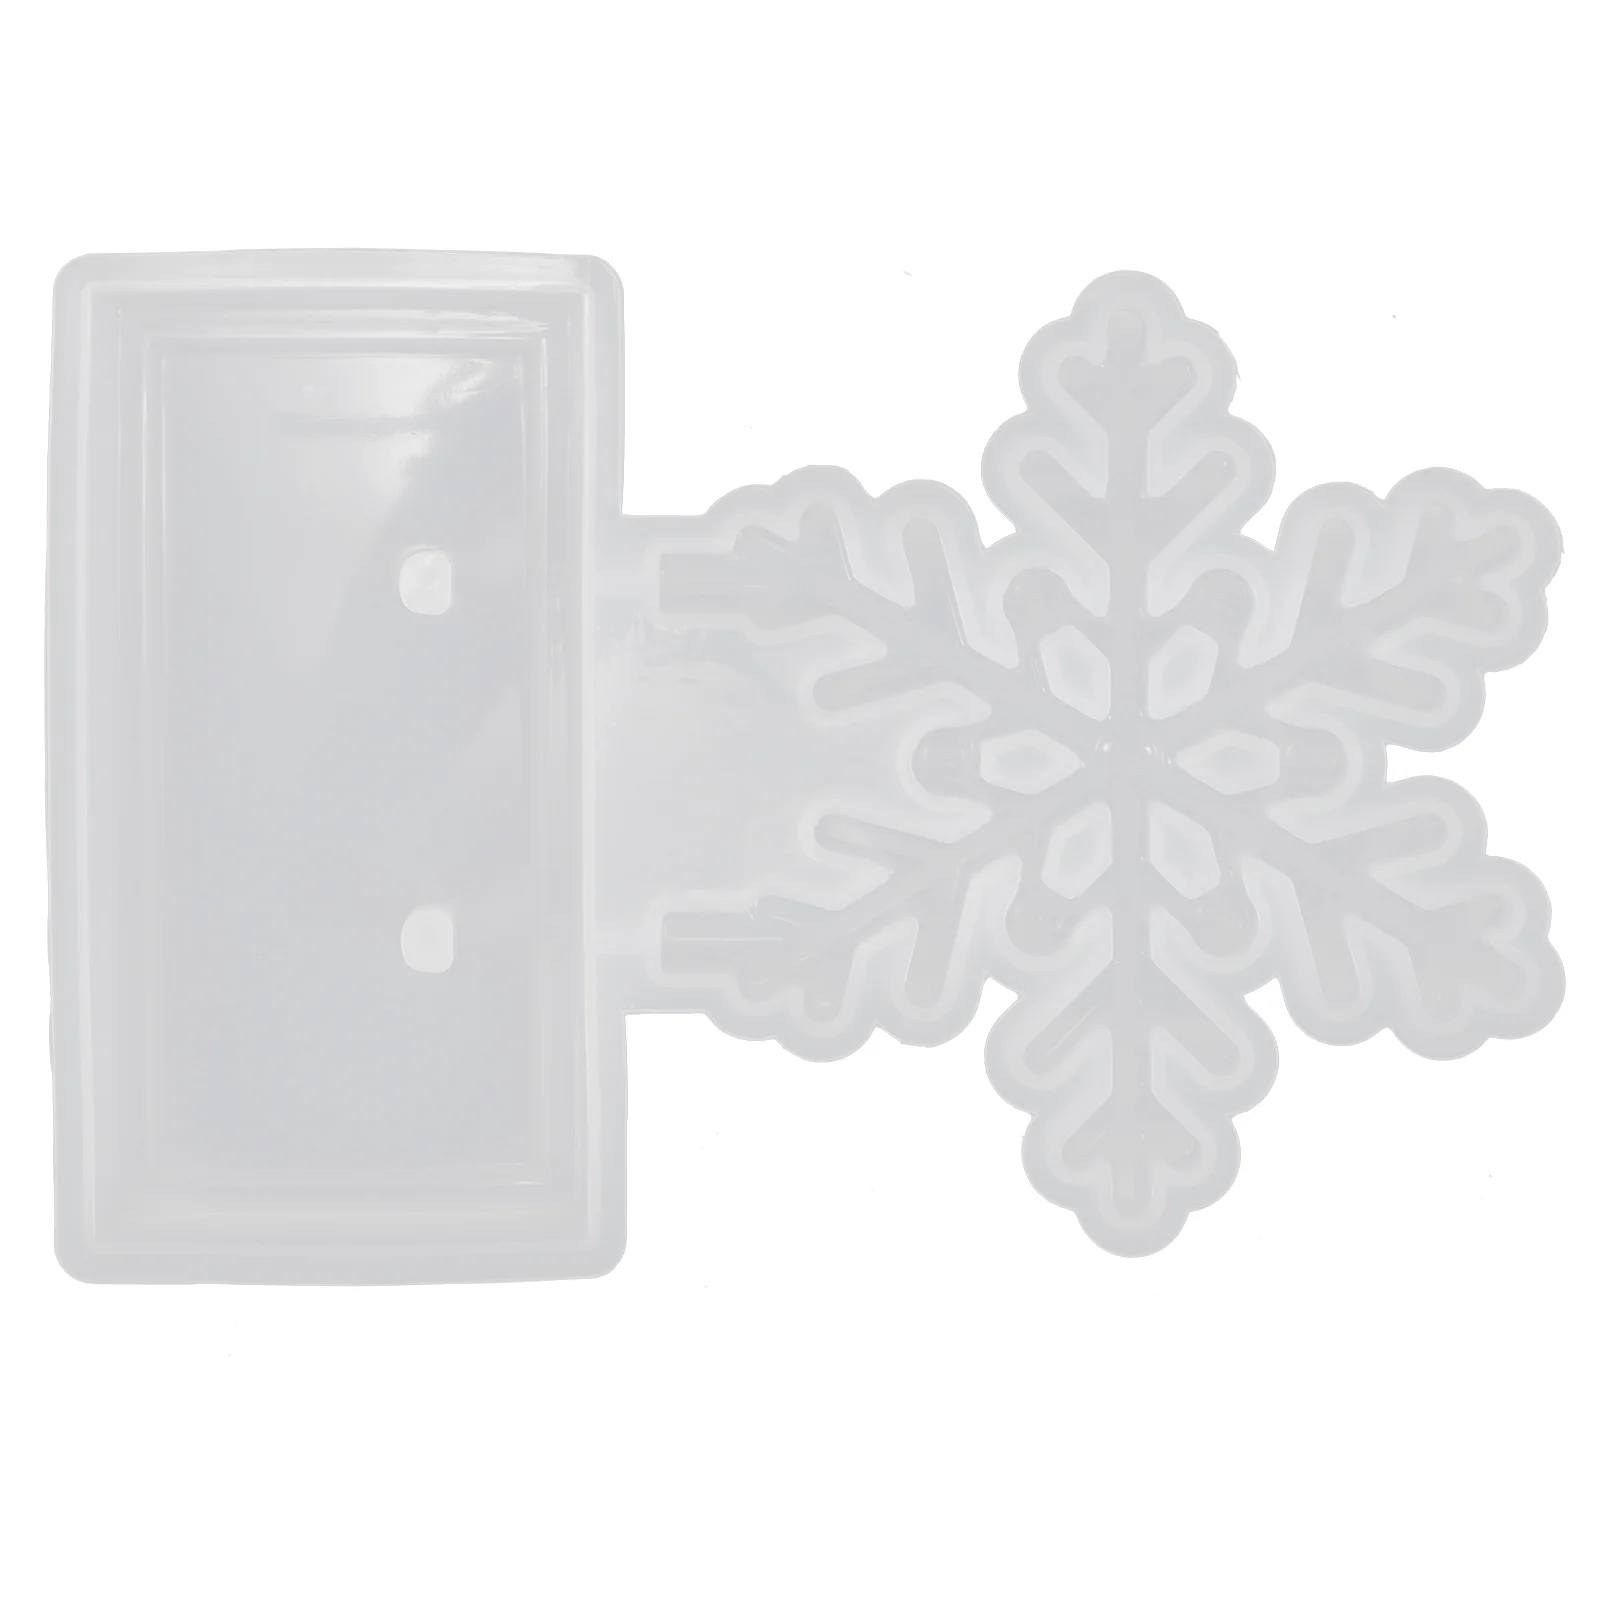 

Snowflake Stencil Xmas Ornament Mold Craft Making Sign Christmas Shape Tabletop Chocolate Molds Silicone Crafts